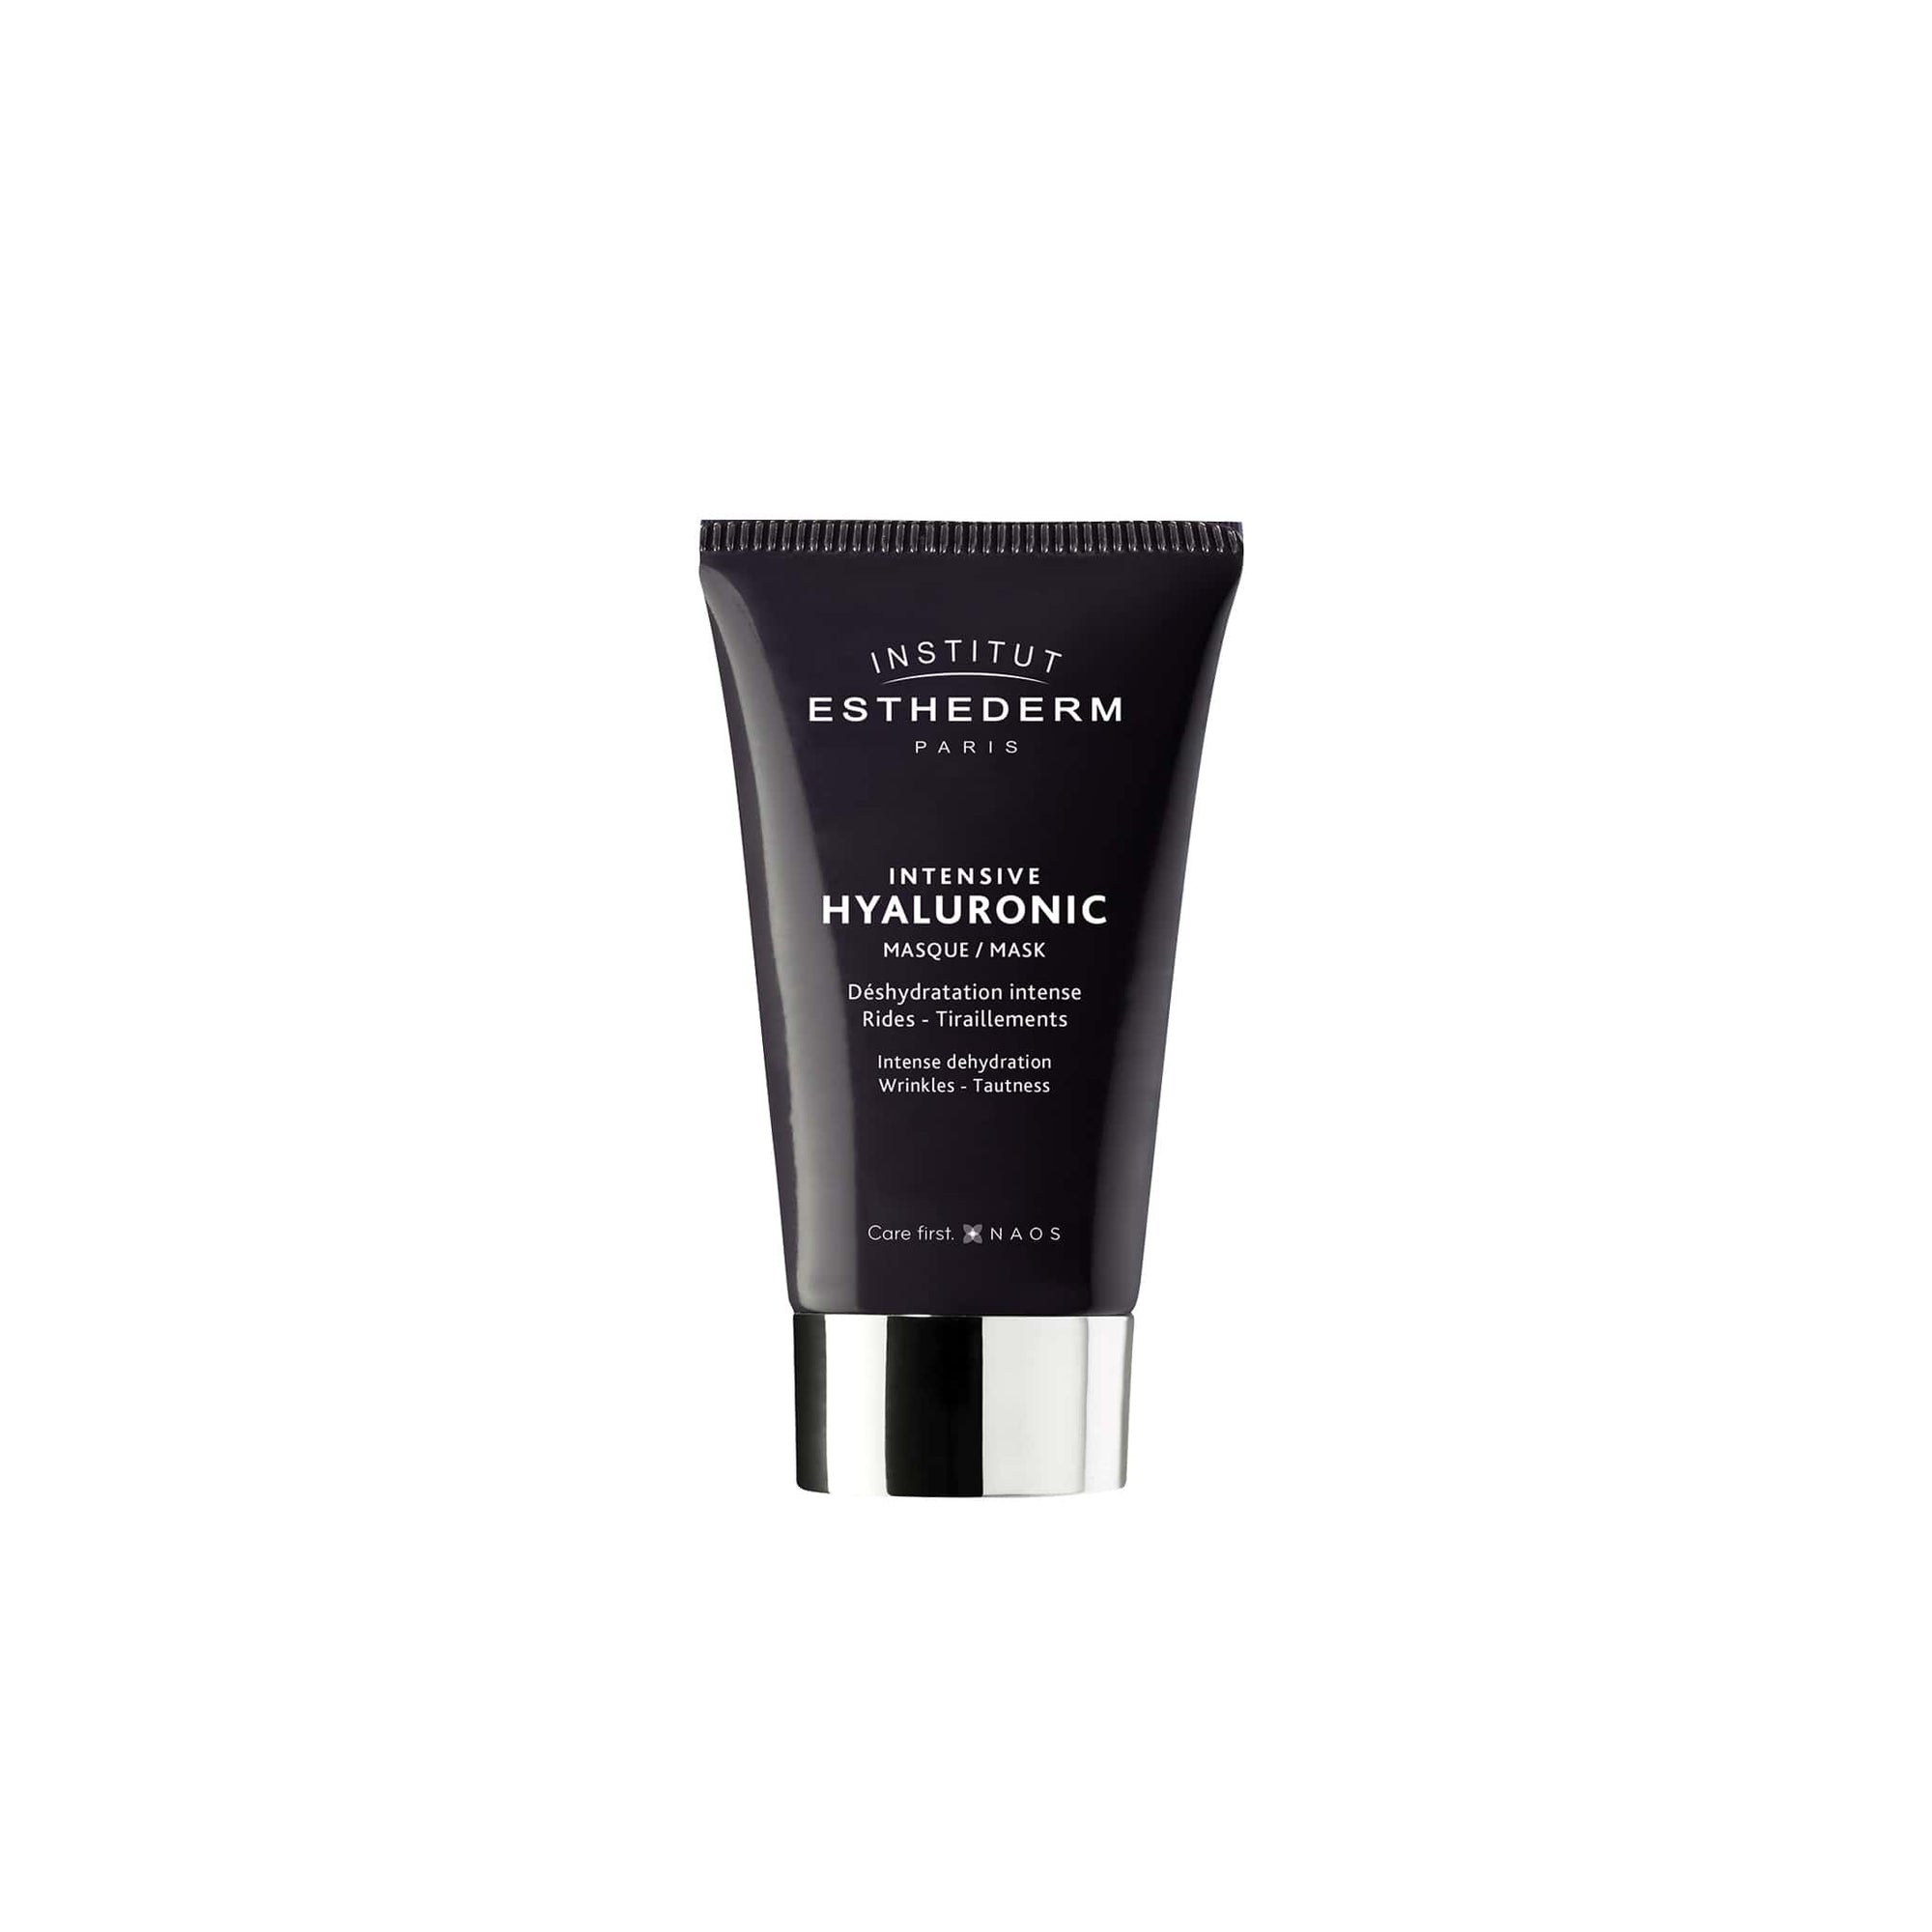 Institut Esthederm Intensive Hyaluronic Mask | Retail Box